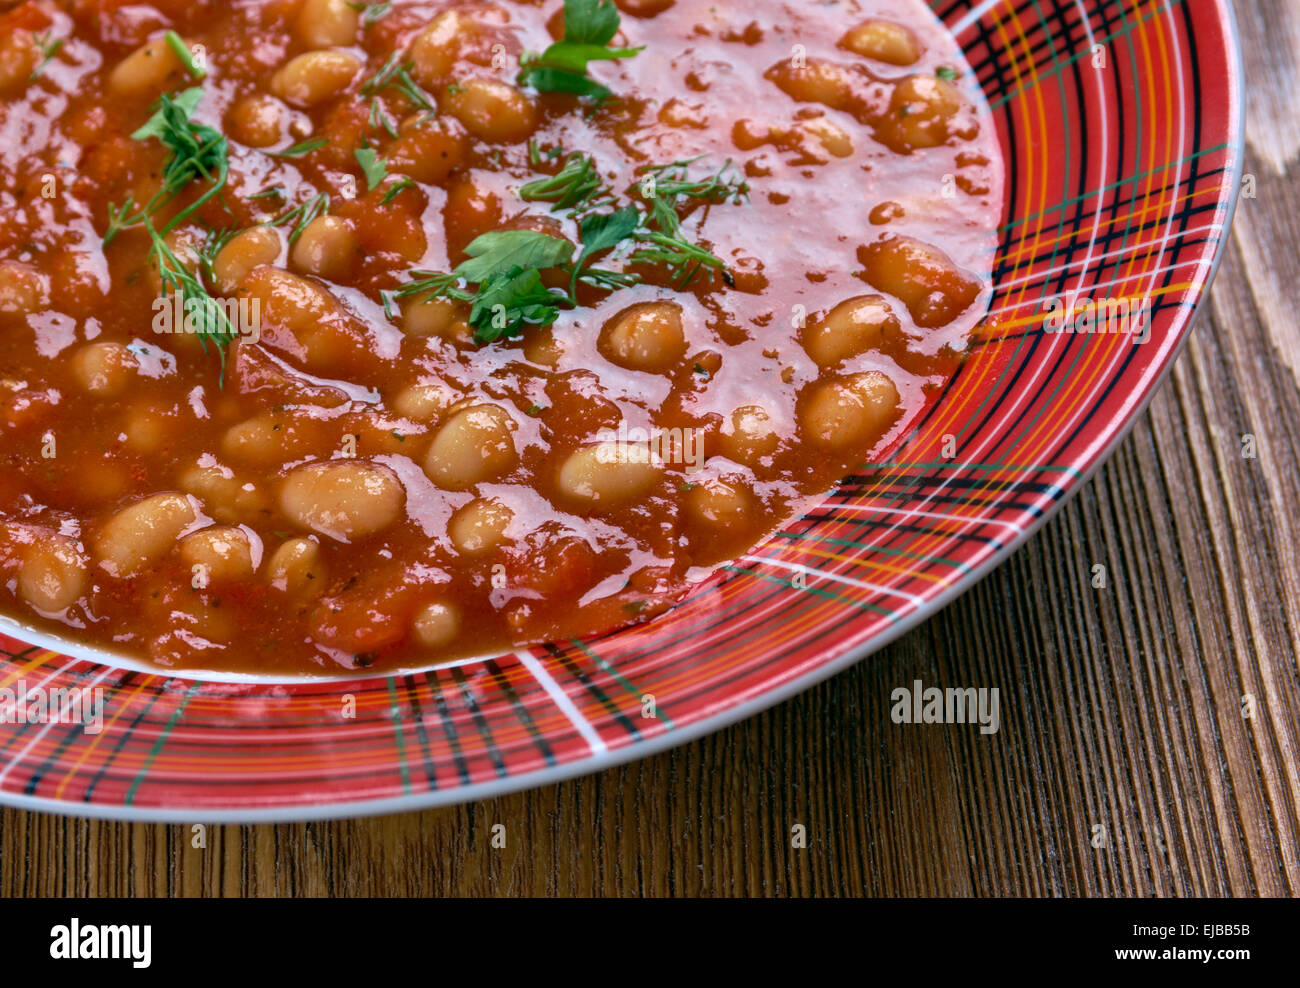 Fagioli High Resolution Stock Photography and Images - Alamy